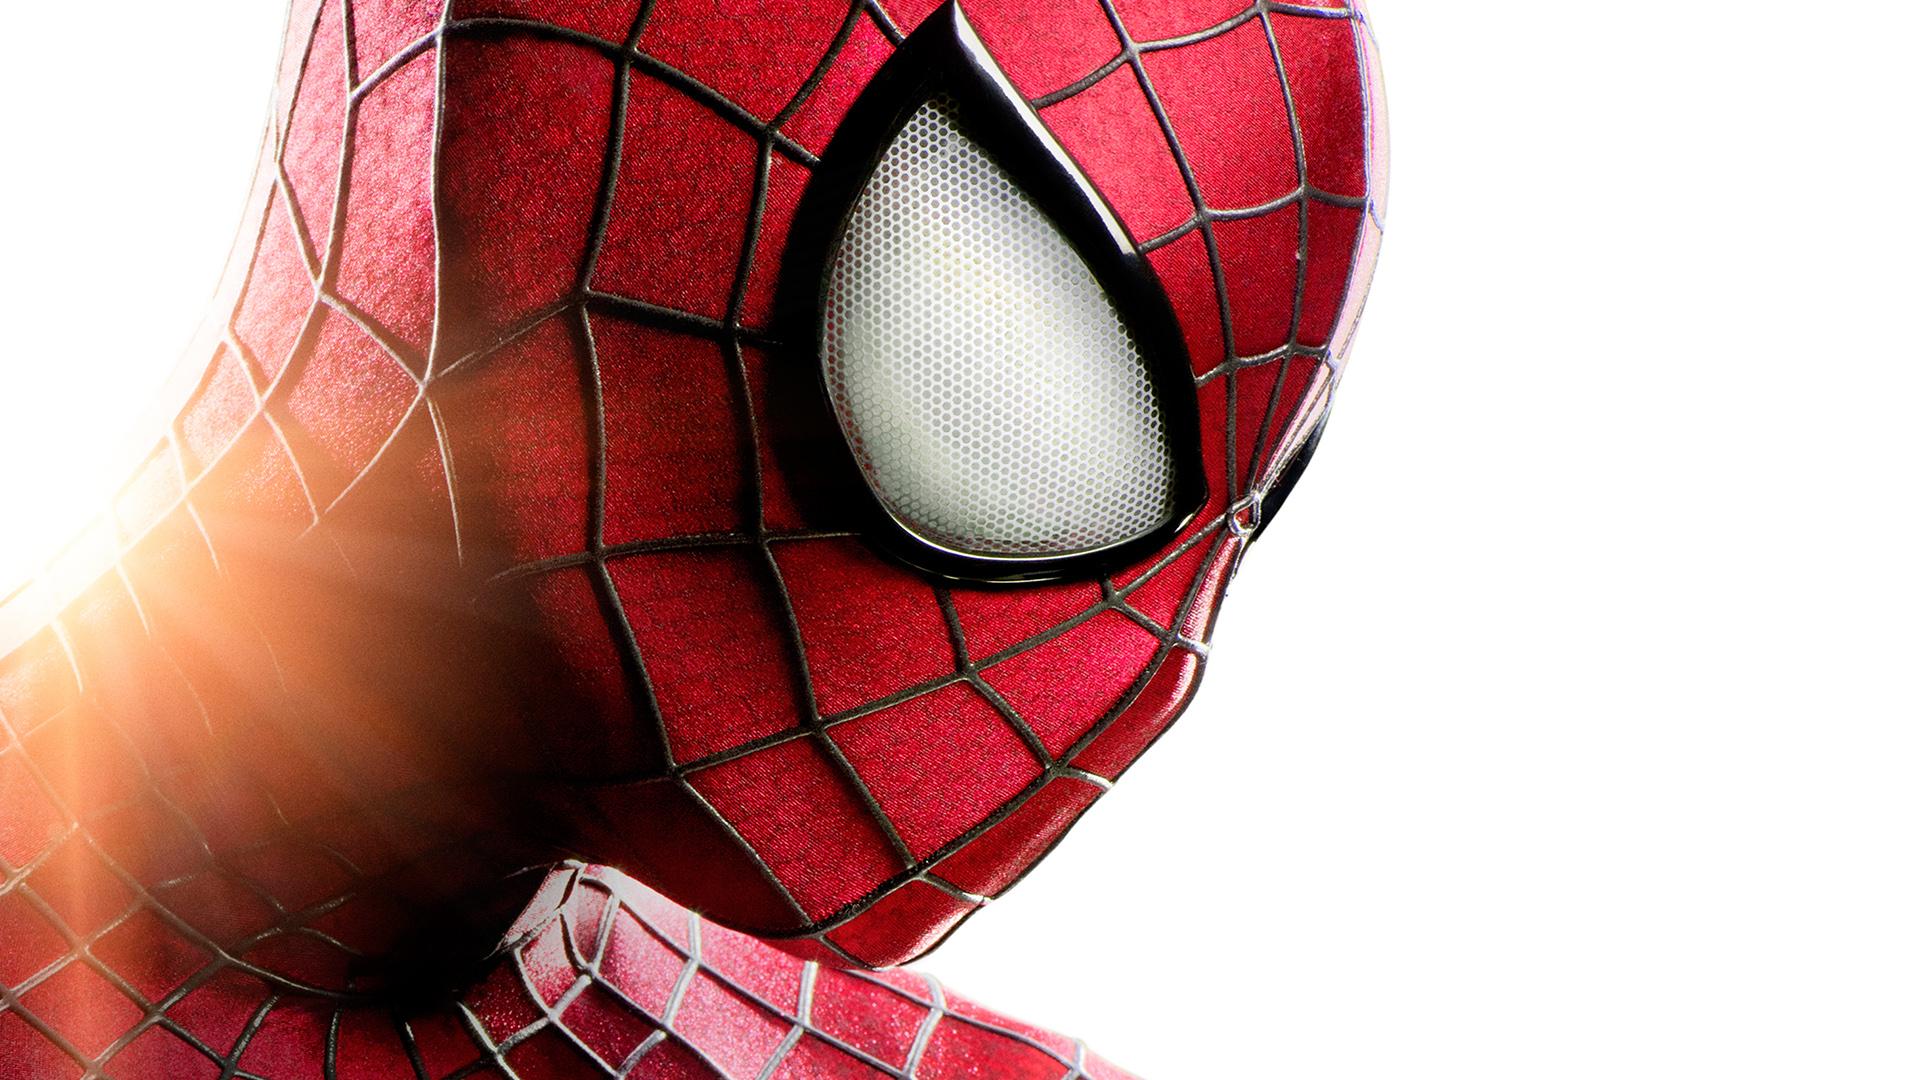 THE AMAZING SPIDER-MAN 2 Spiderman head wallpaper Wallpapers HD